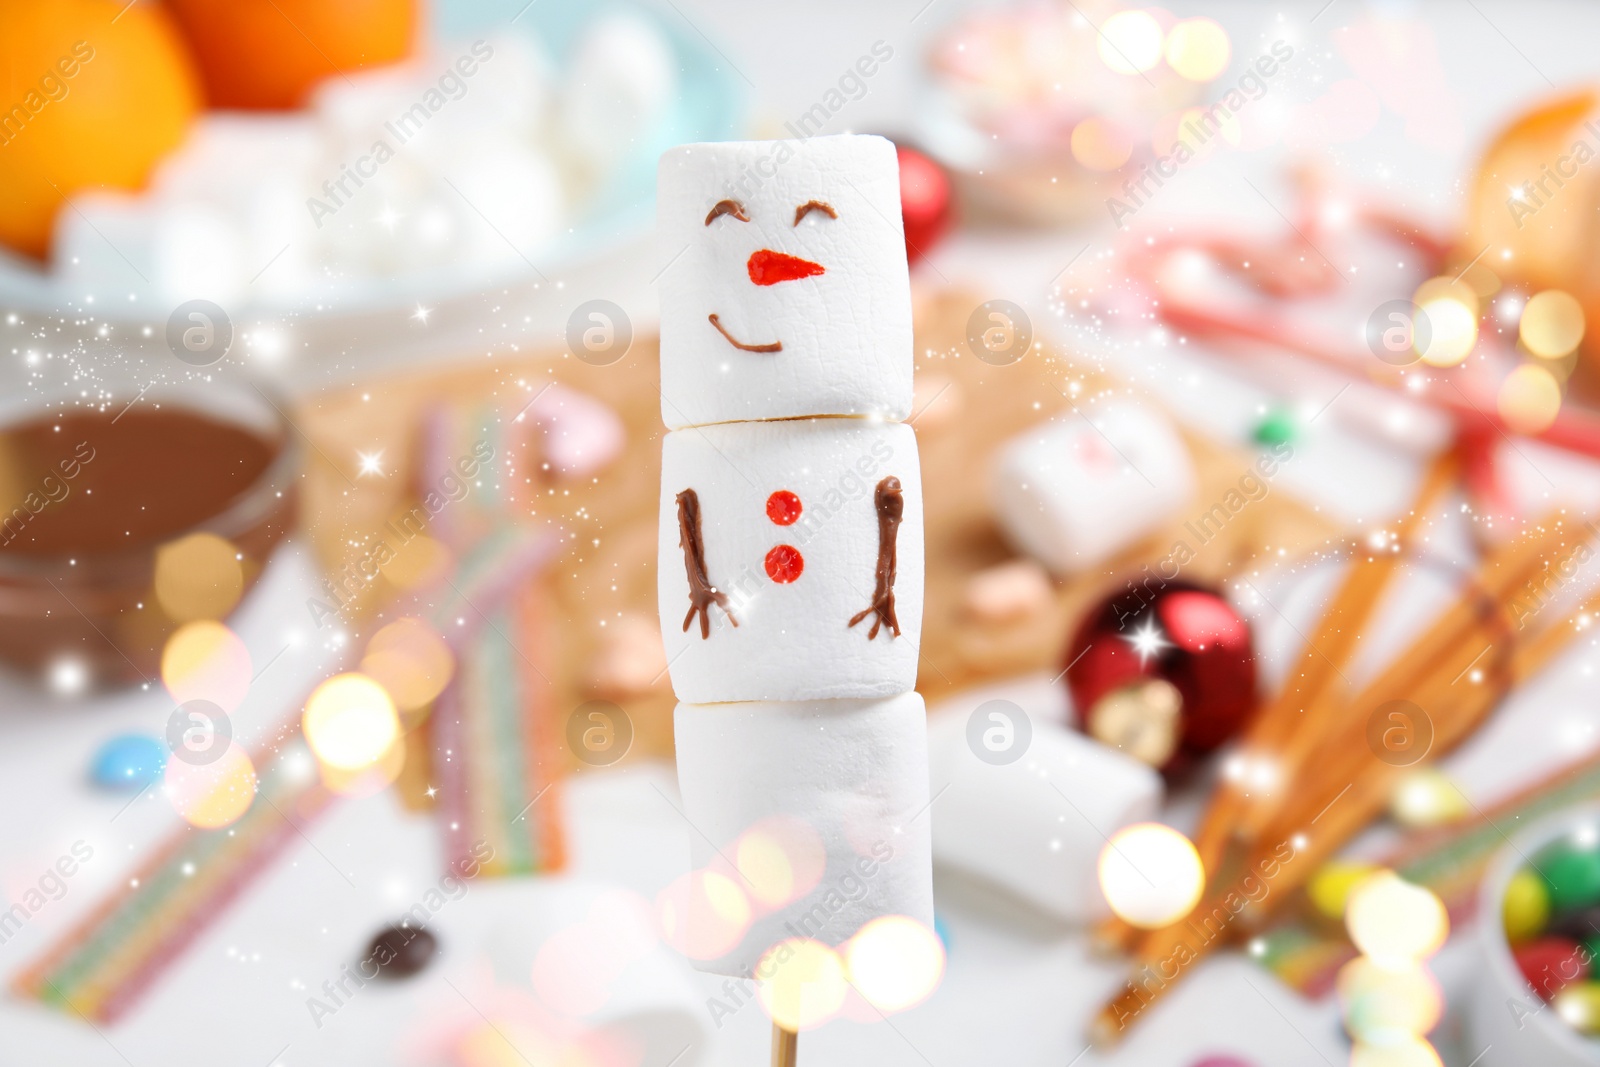 Image of Funny snowman made of marshmallows on blurred background, closeup. Bokeh effect 